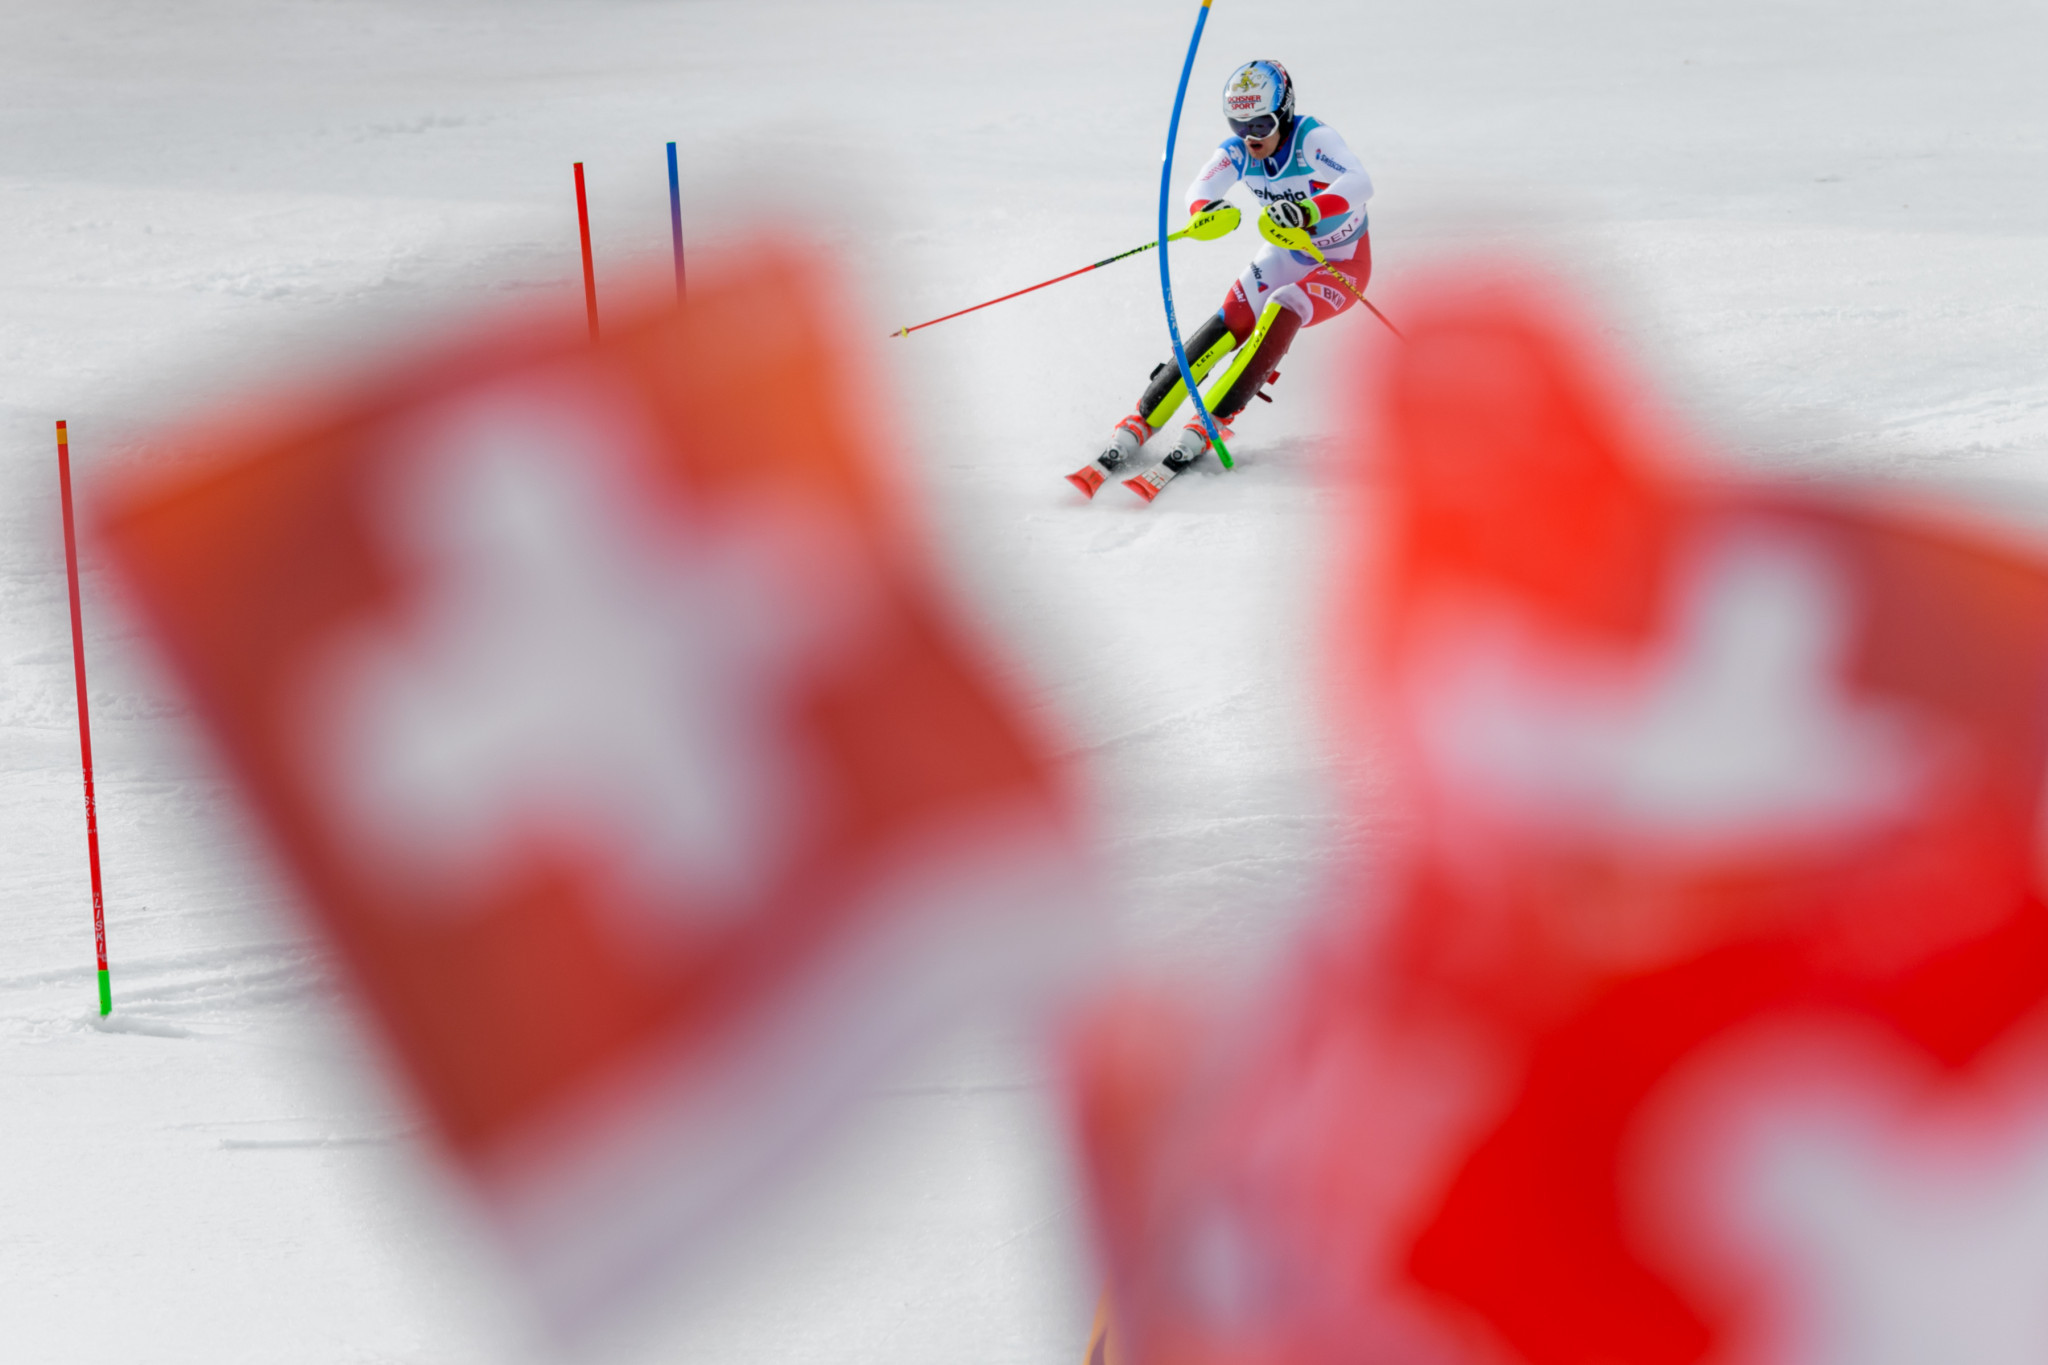 Swiss-Ski and Swisscom have been partners since 2002 ©Getty Images